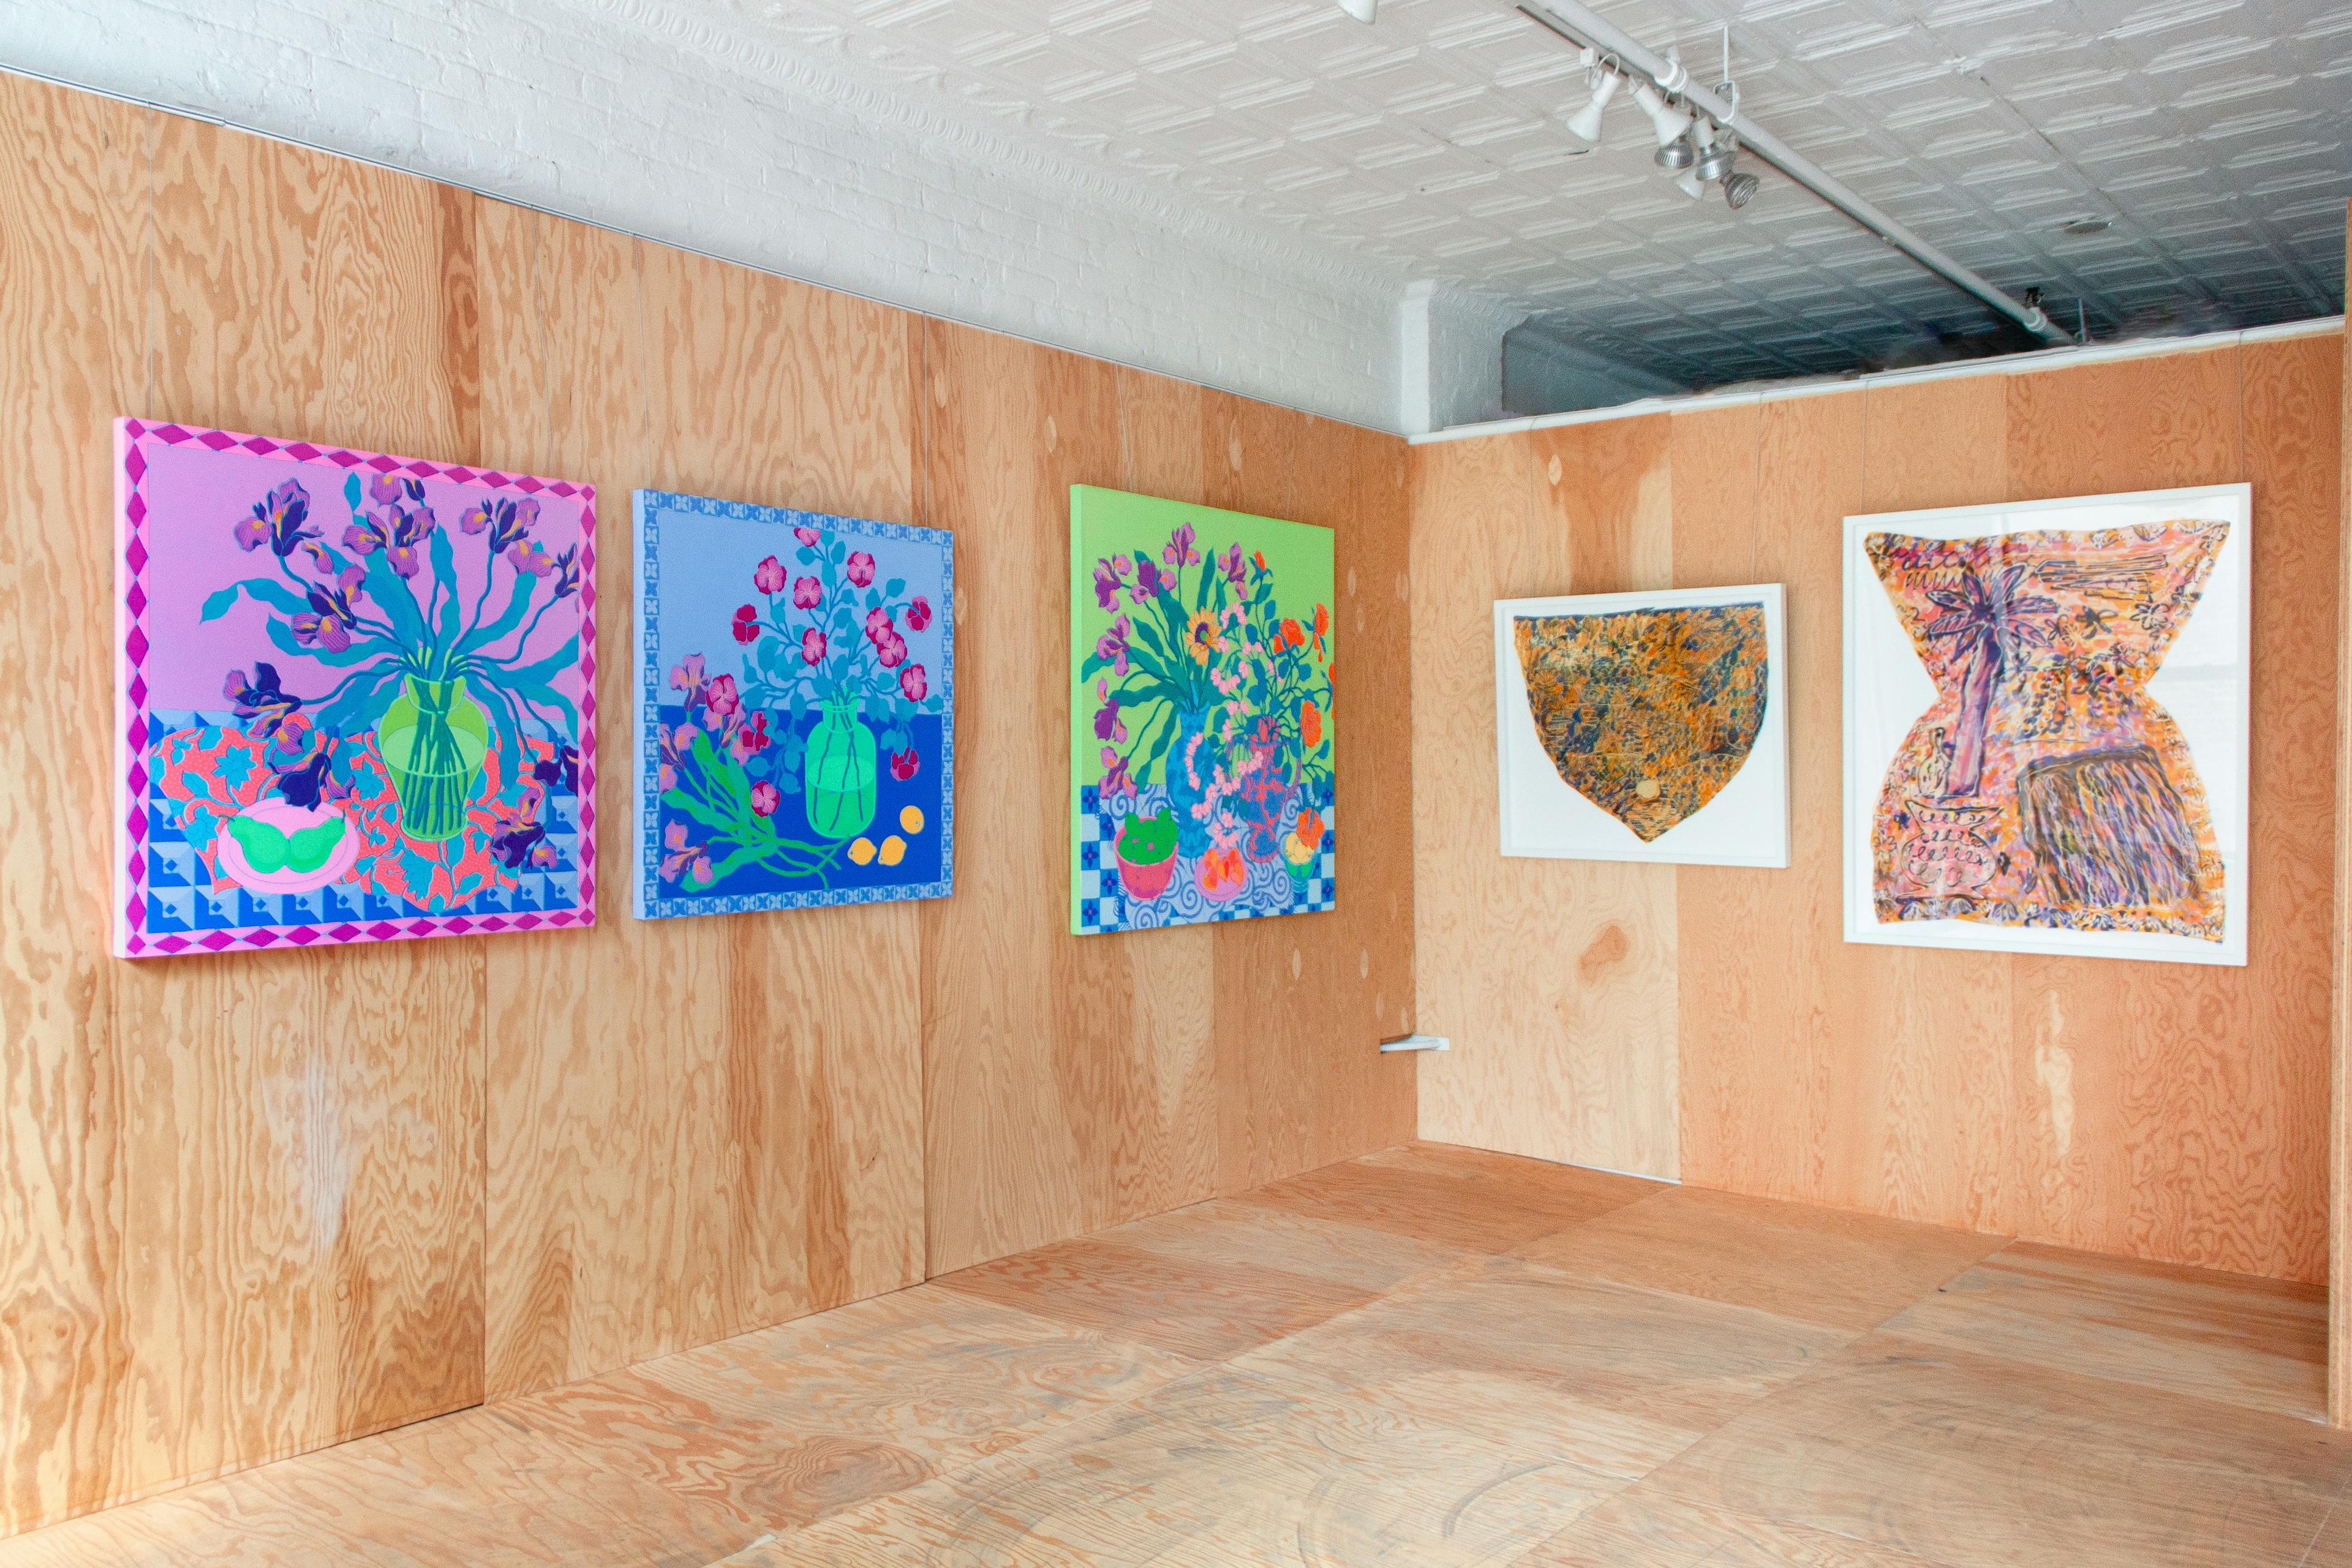 Artwork installed as part of Over Order, one of Uprise Art's Exhibitions in New York, NY.